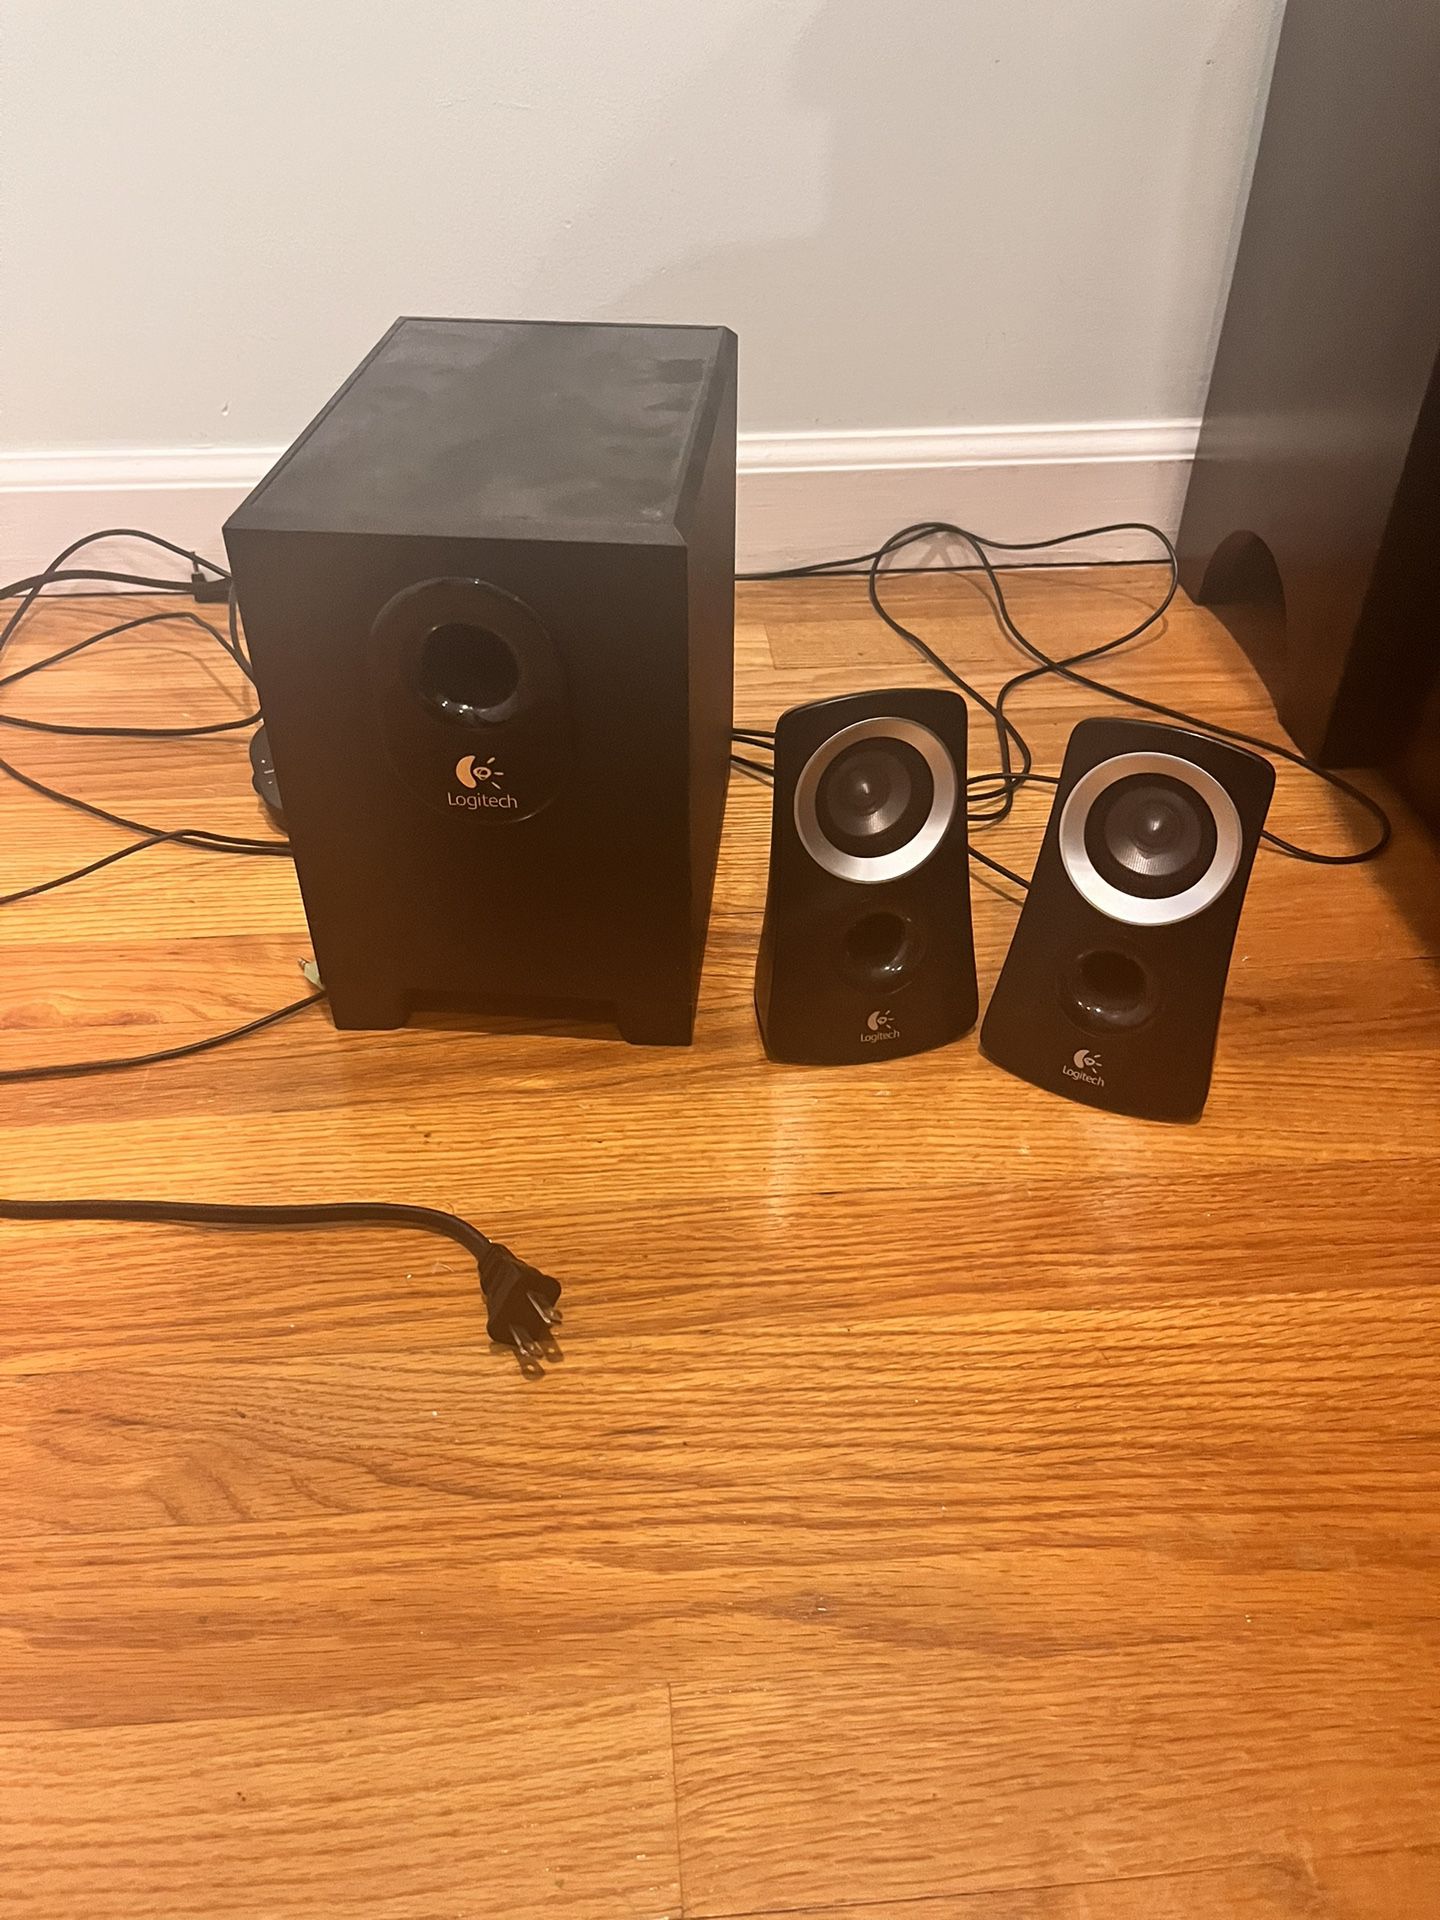 Subwoofer Logitech Z313 speaker system for in Briarcliff Manor, NY - OfferUp